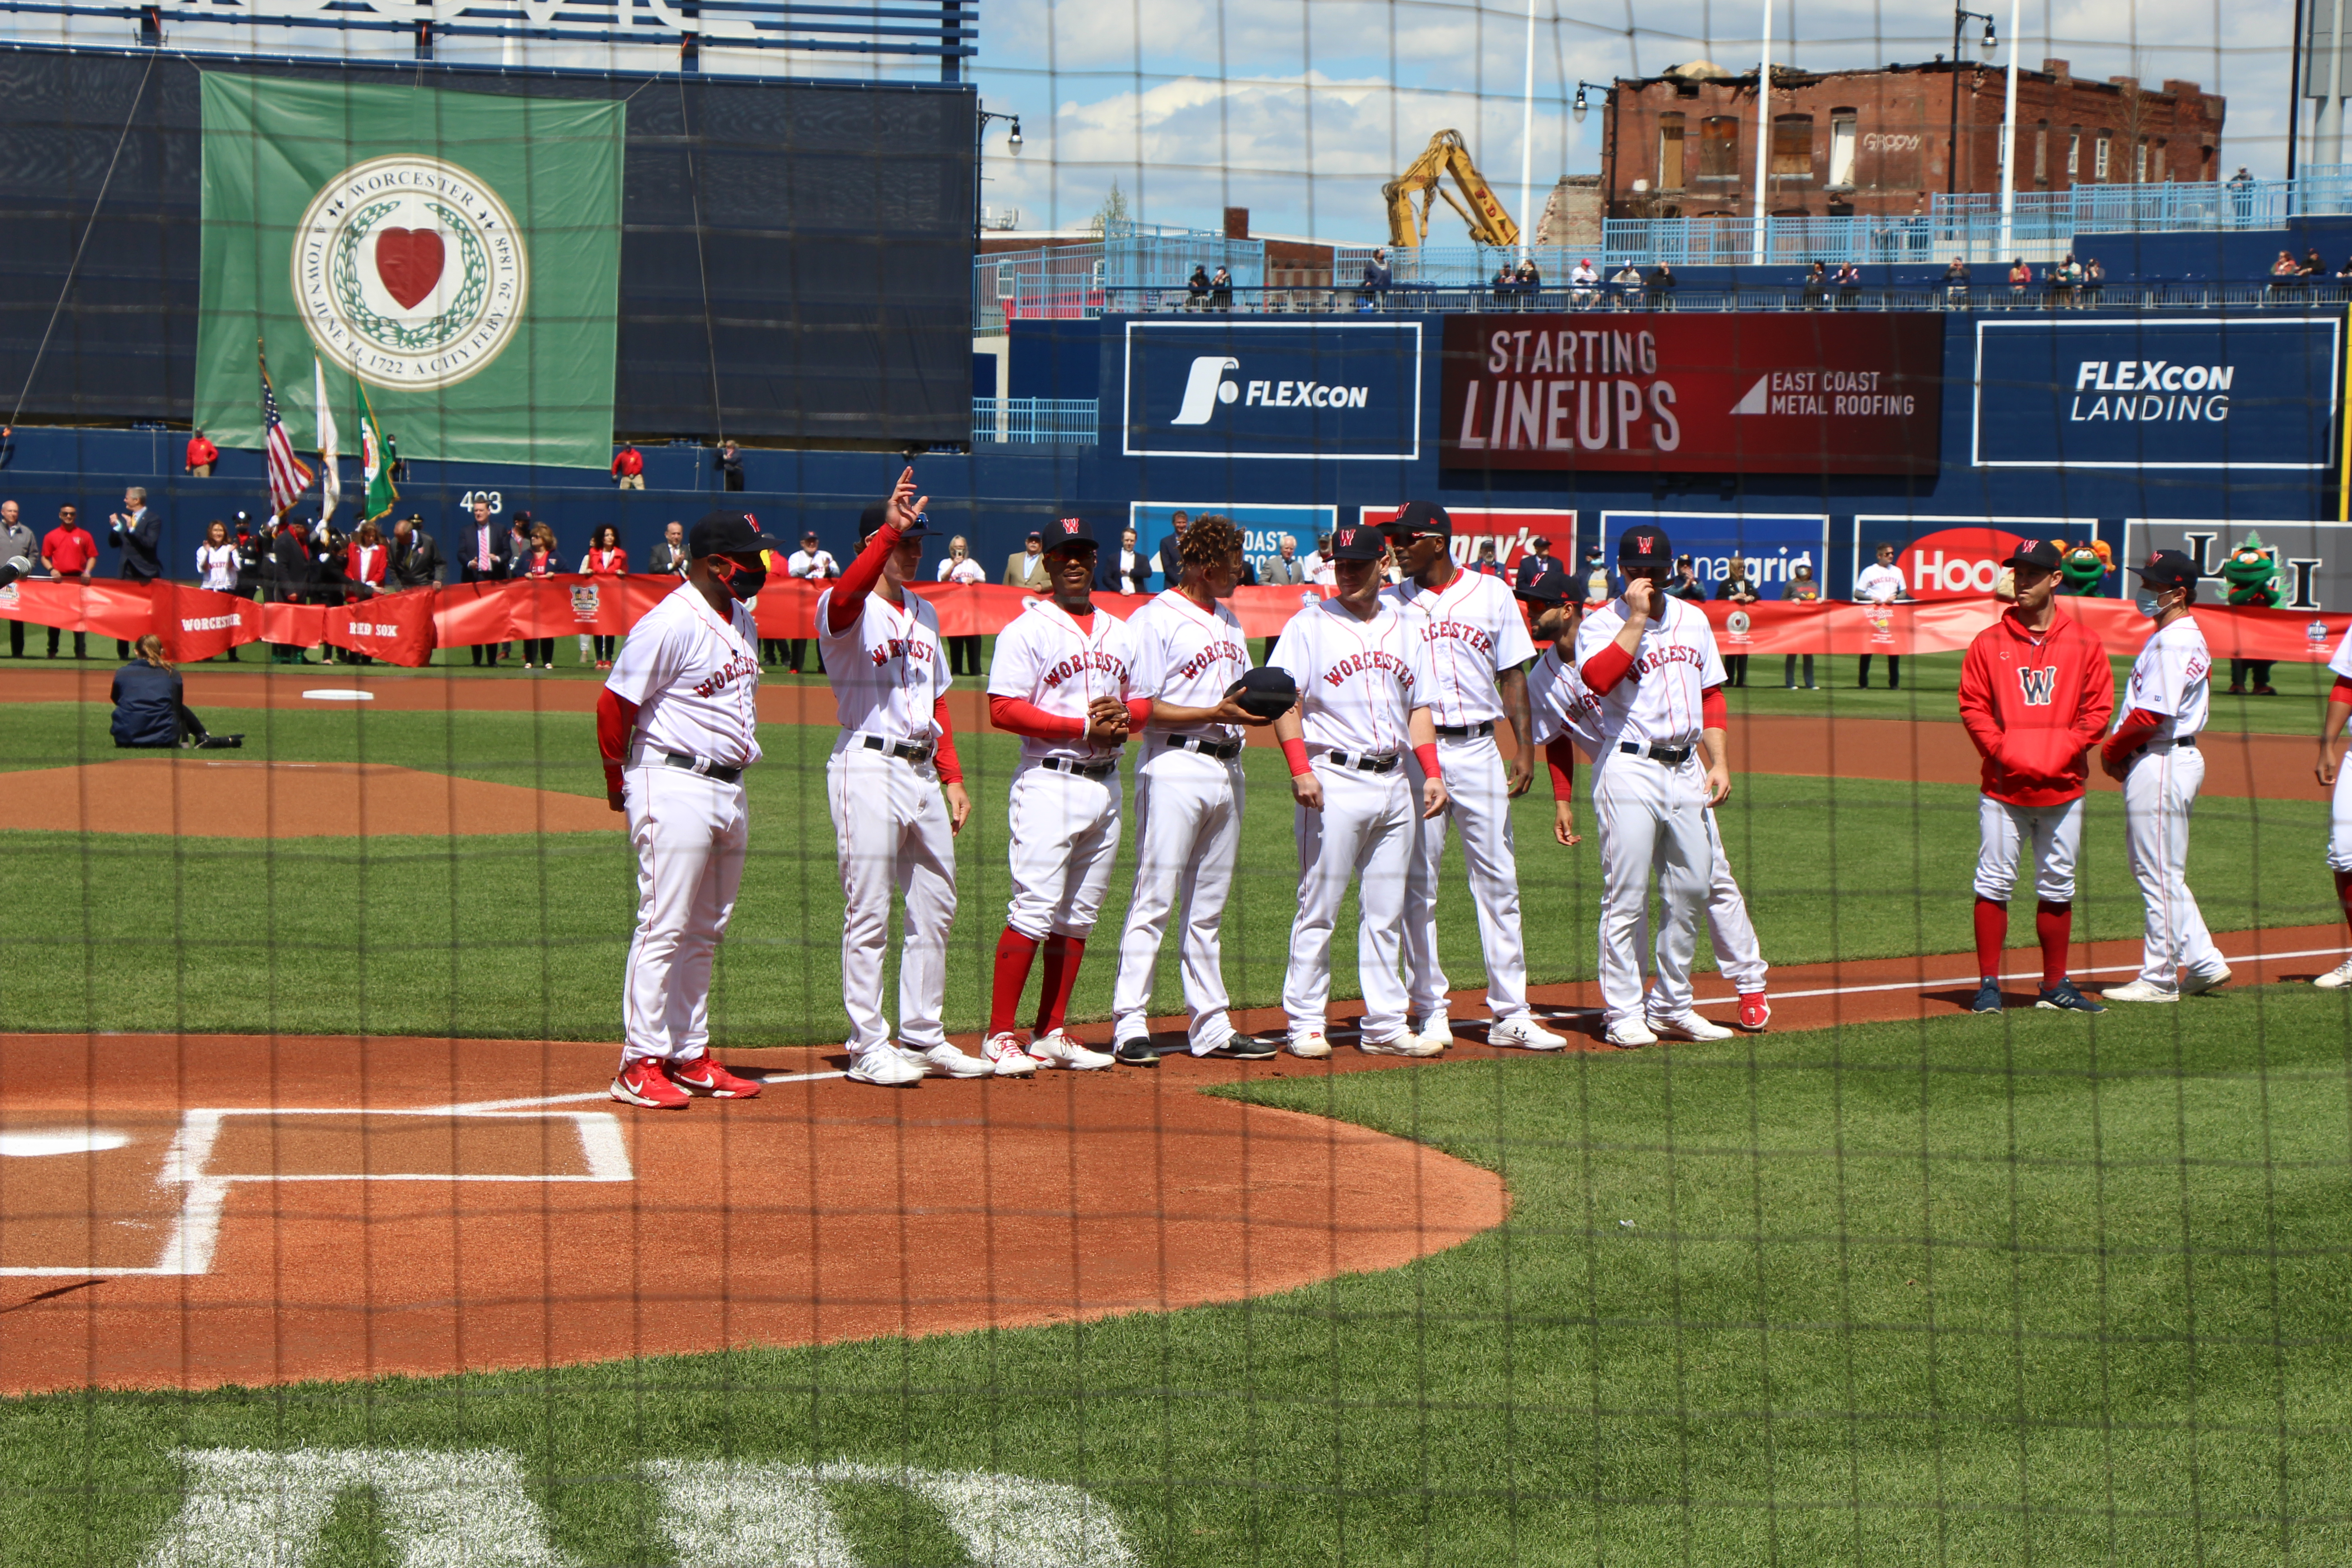 Polar Park Stadium and the Debut of the Worcester Red Sox - The Scarlet